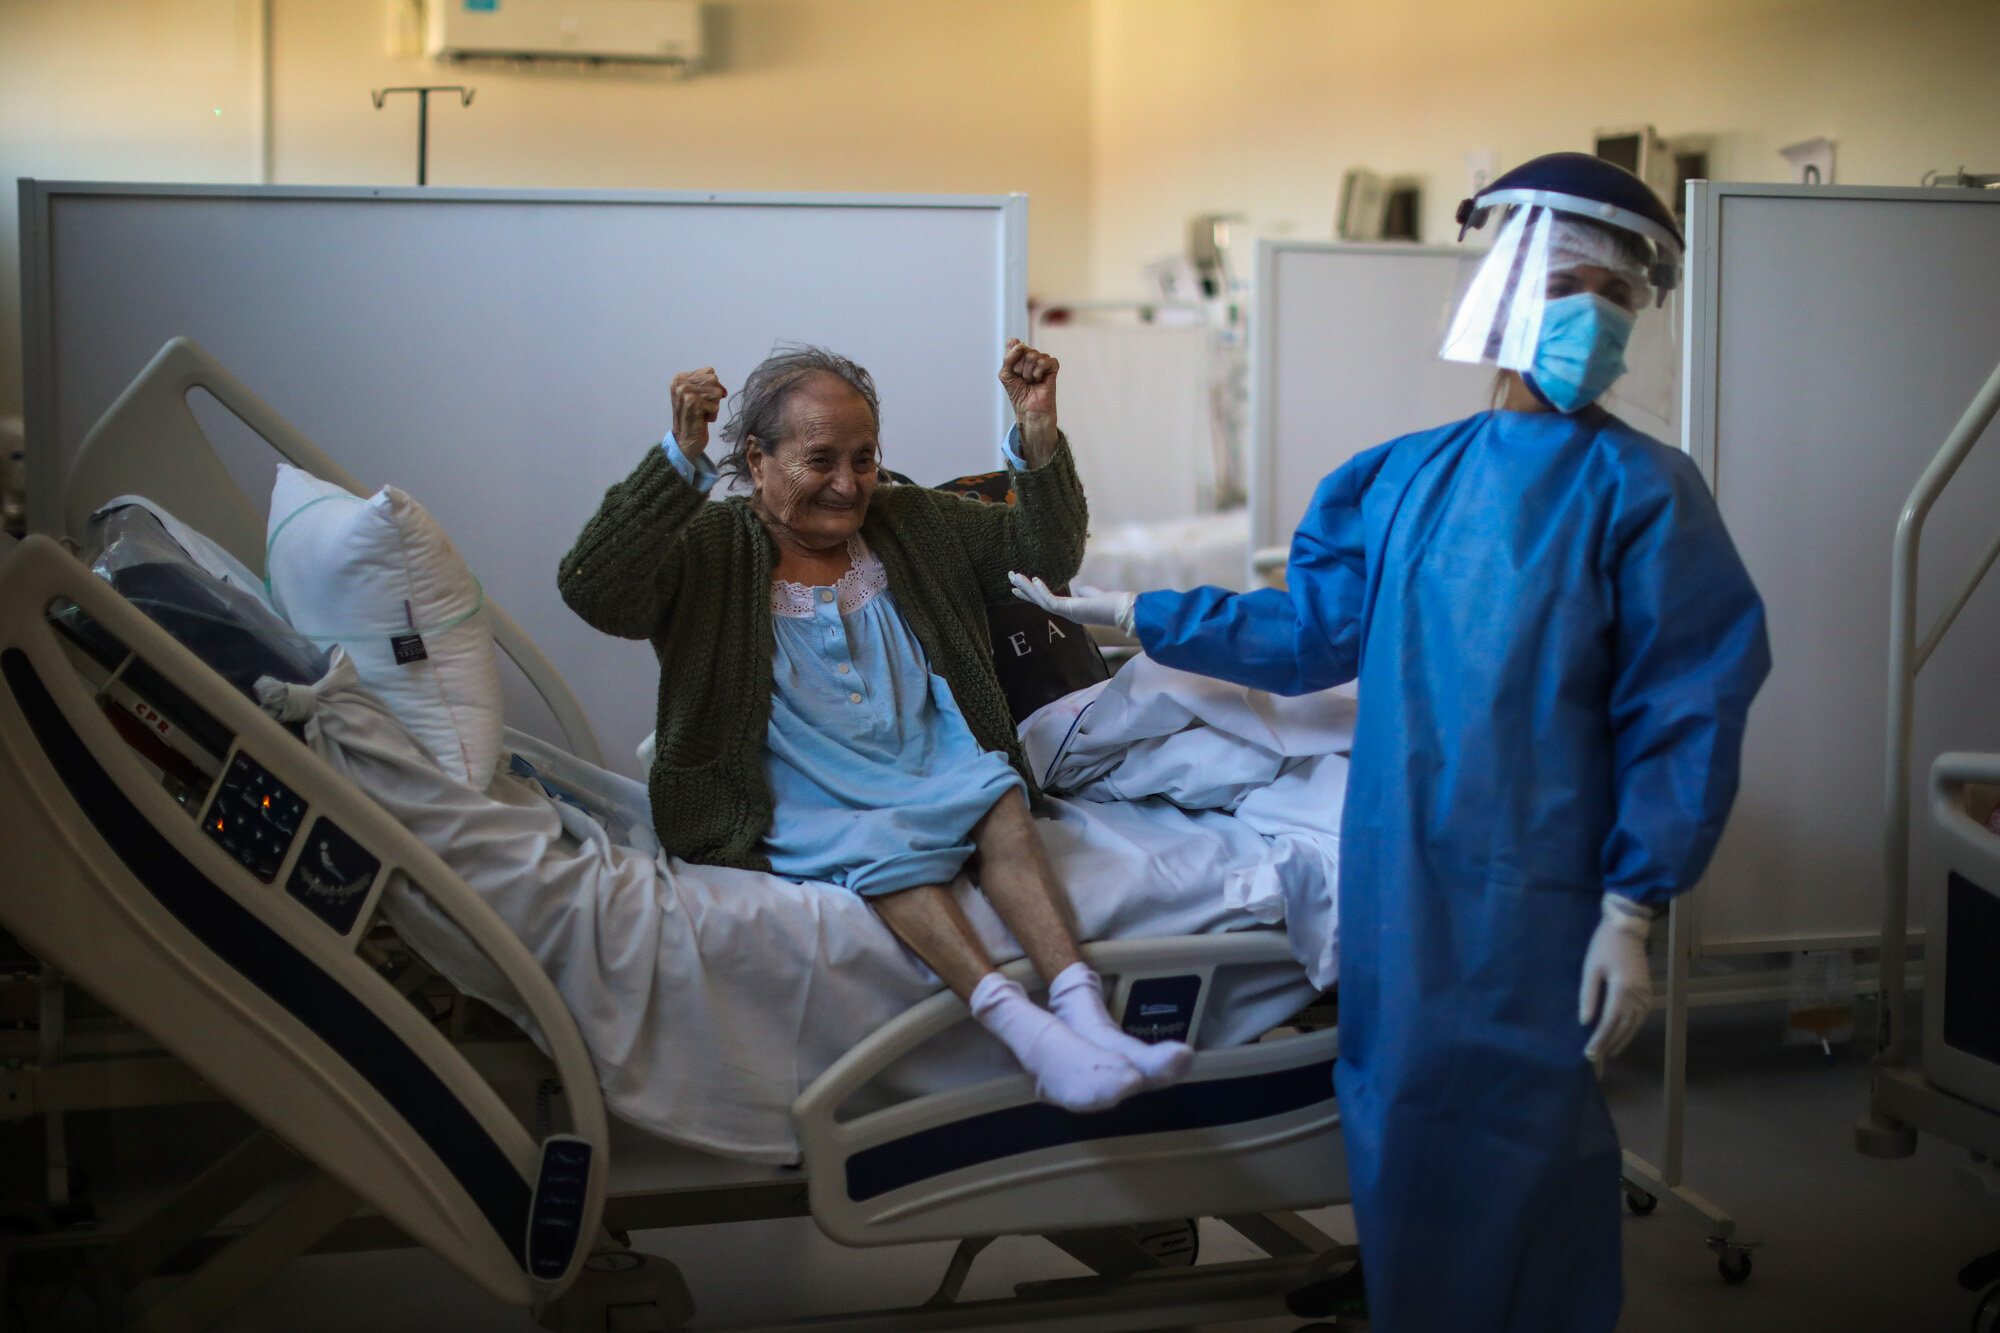  Blanca Ortiz, 84, celebrates after learning from nurses that she will be dismissed from the Eurnekian Ezeiza Hospital, on the outskirts of Buenos Aires, Argentina, on Aug. 13, 2020, several weeks after being admitted with COVID-19. (AP Photo/Natacha